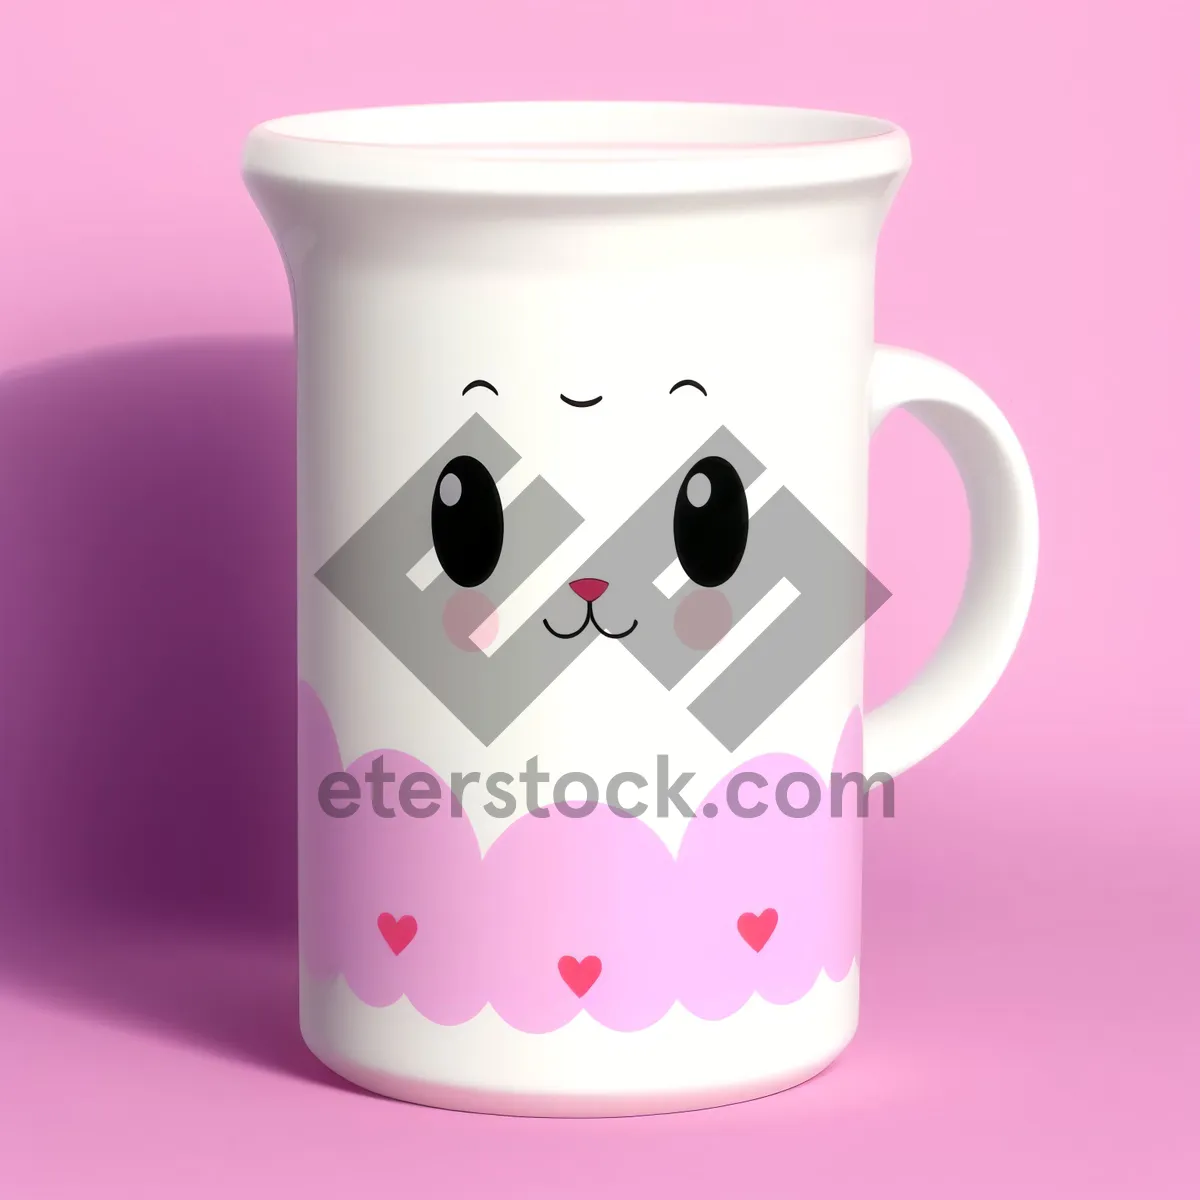 Picture of Hot Ceramic Coffee Mug on Saucer - Tableware for Morning Beverages